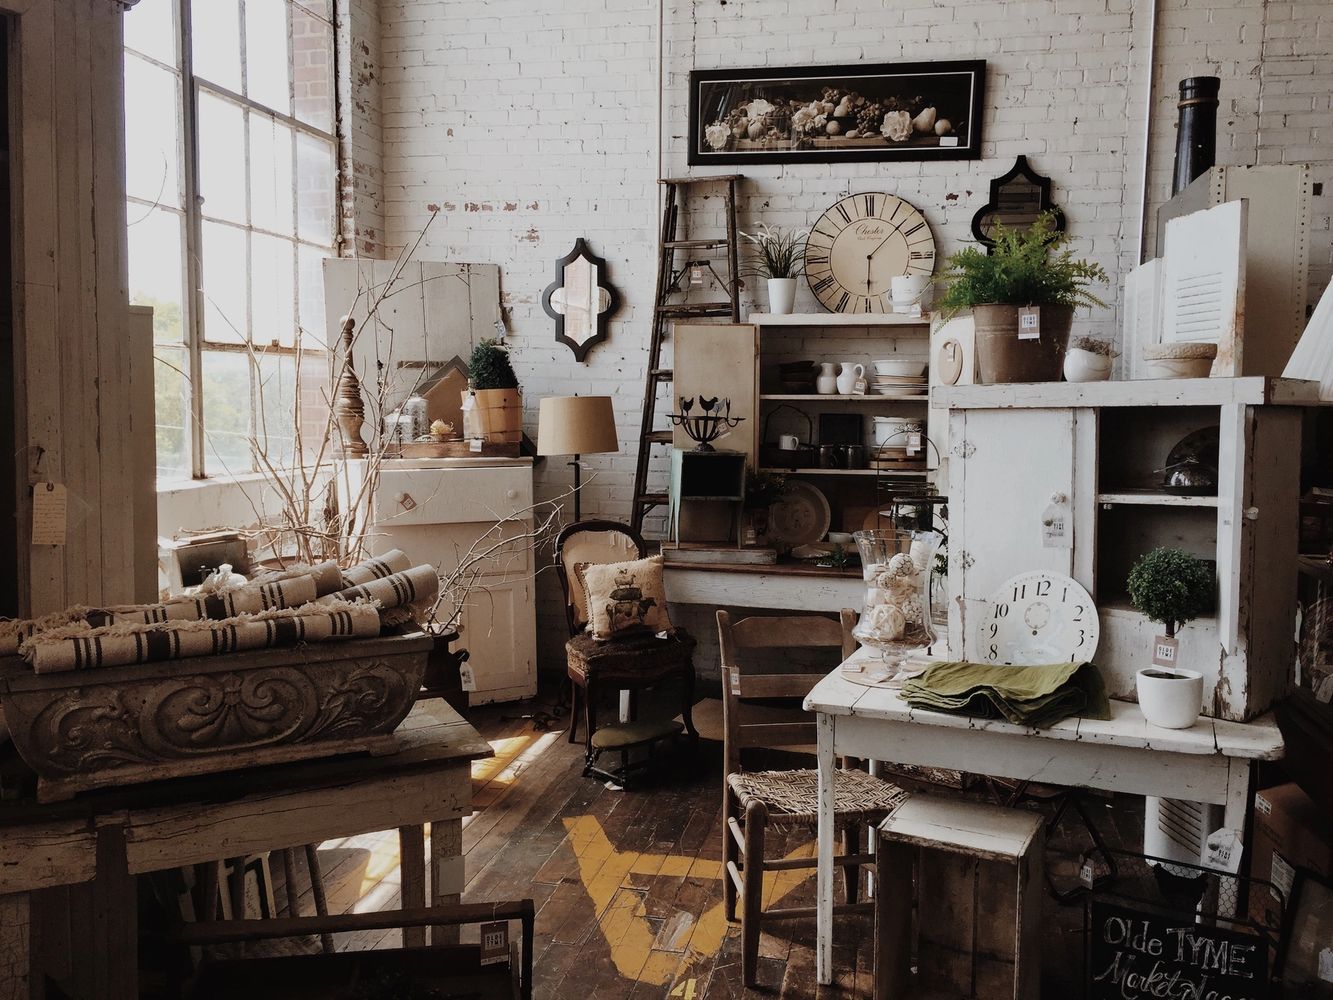 Antiques in vintage store, Sparrow located in Waco Texas